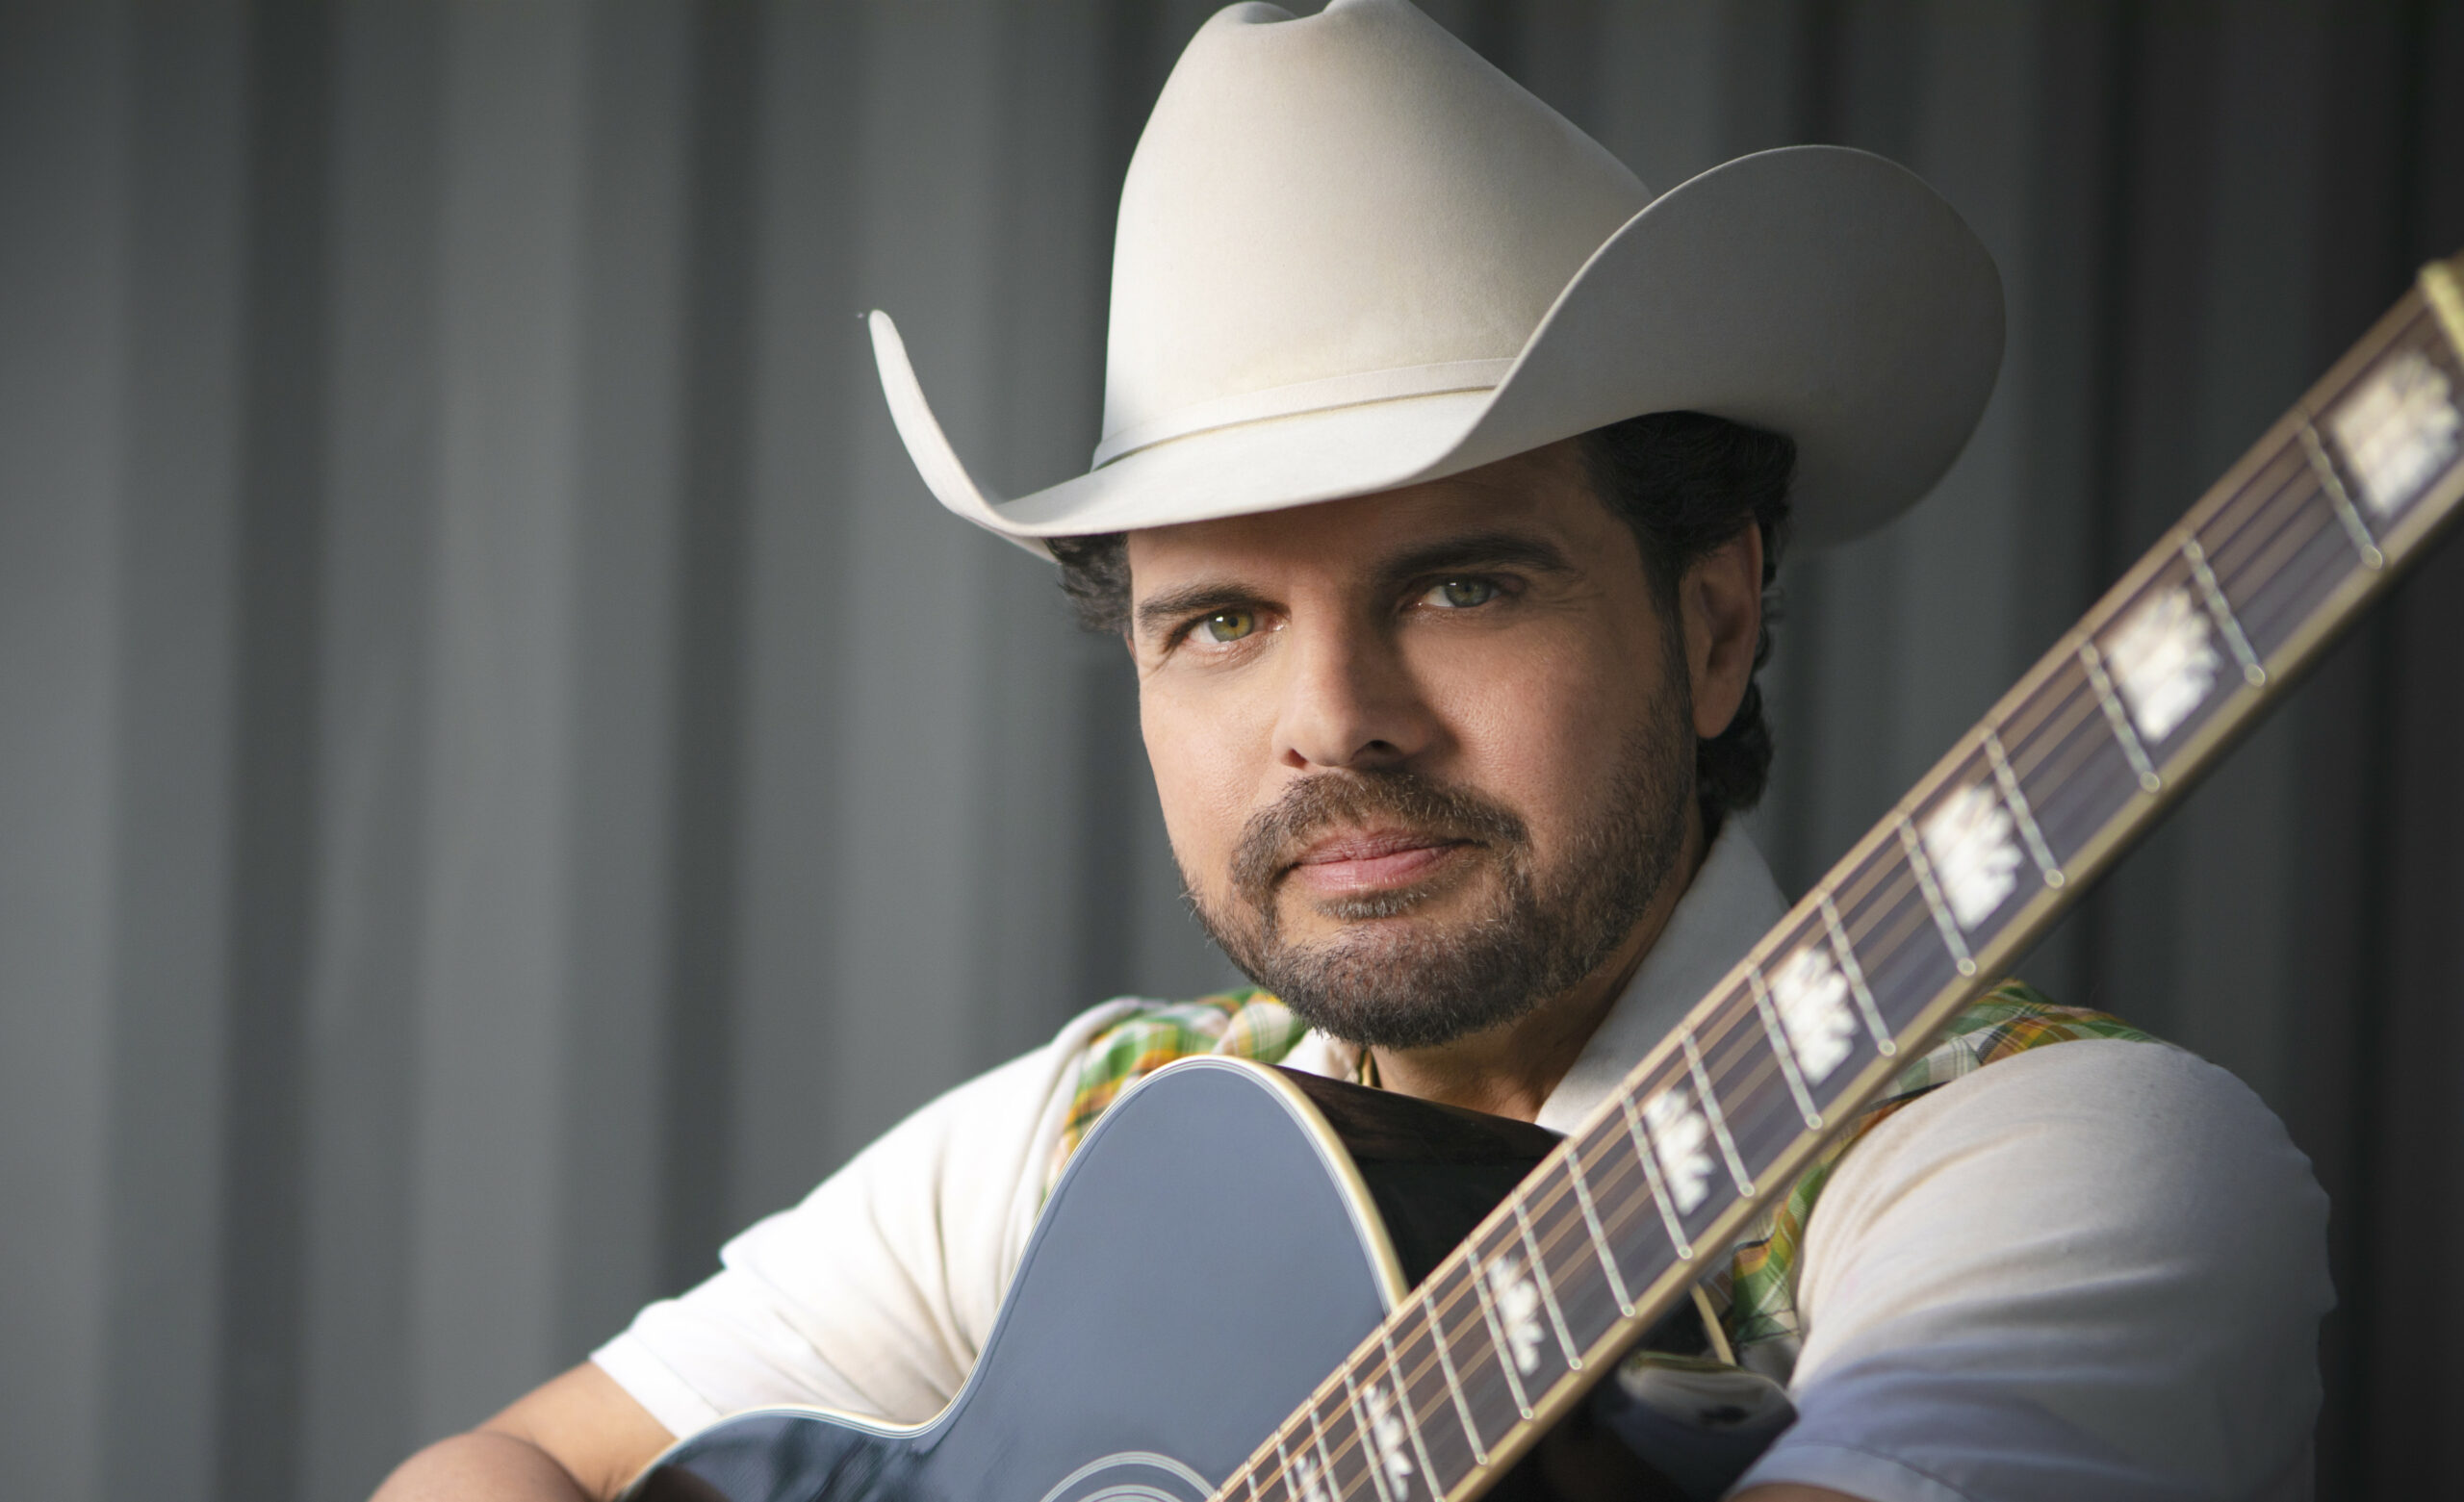 <h1 class="tribe-events-single-event-title">Win Rick Trevino Tickets at FASTSIGNS TEXOMA in Sherman on Tuesday, March 19th (3pm-6pm)</h1>